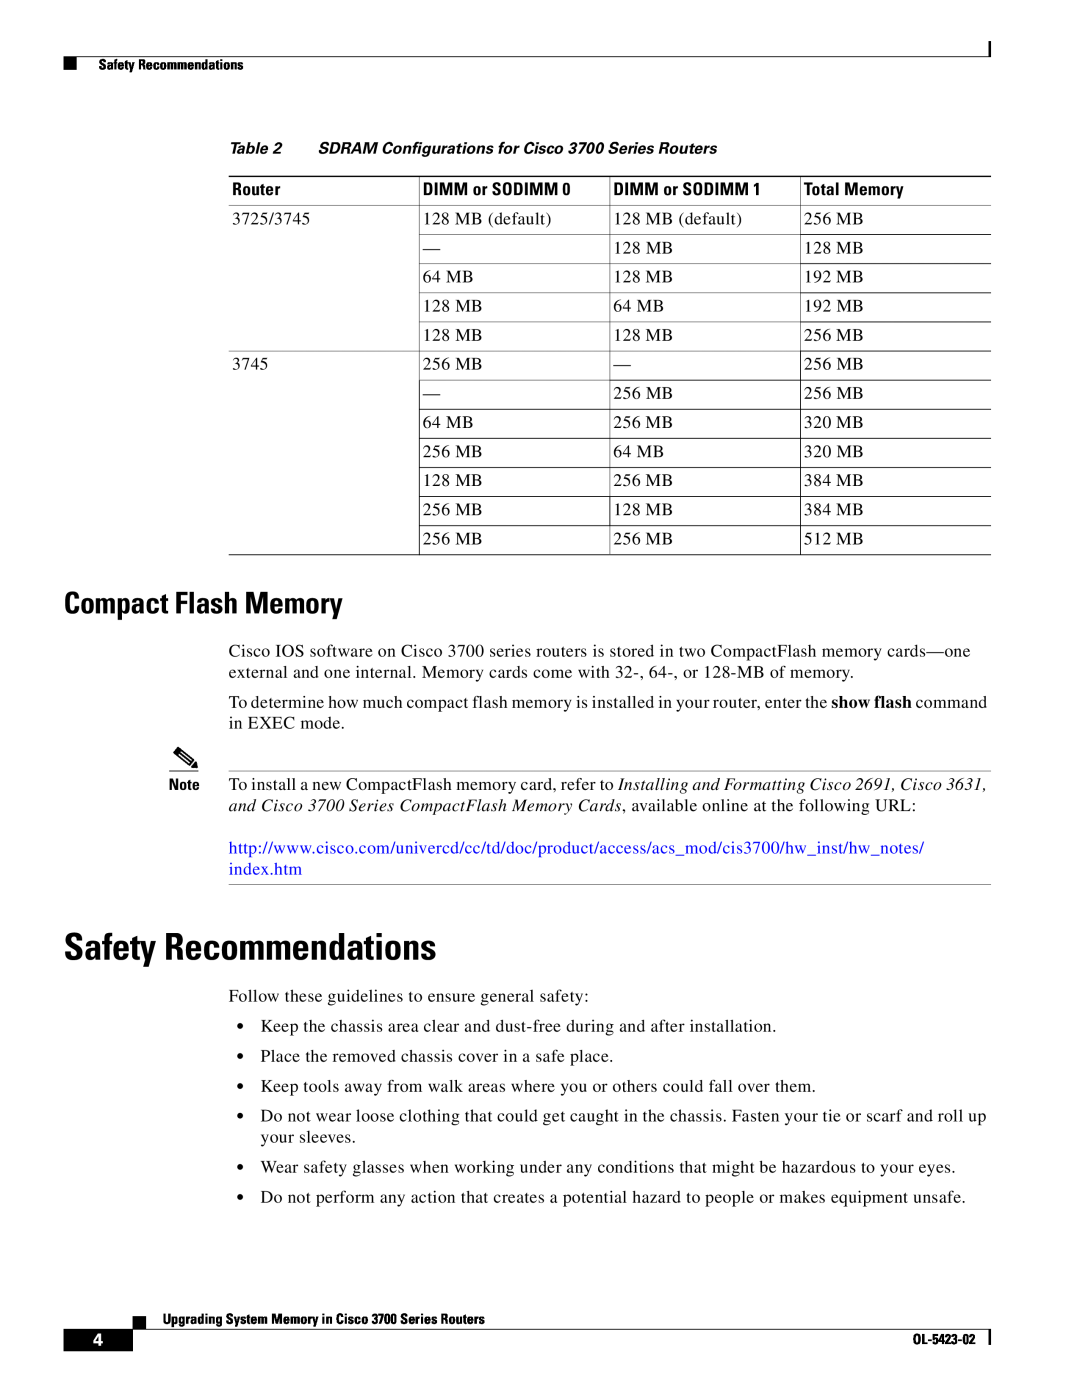 Cisco Systems 3725 Series, 3600 Series Safety Recommendations, Compact Flash Memory, DIMM or SODIMM, Total Memory, Router 